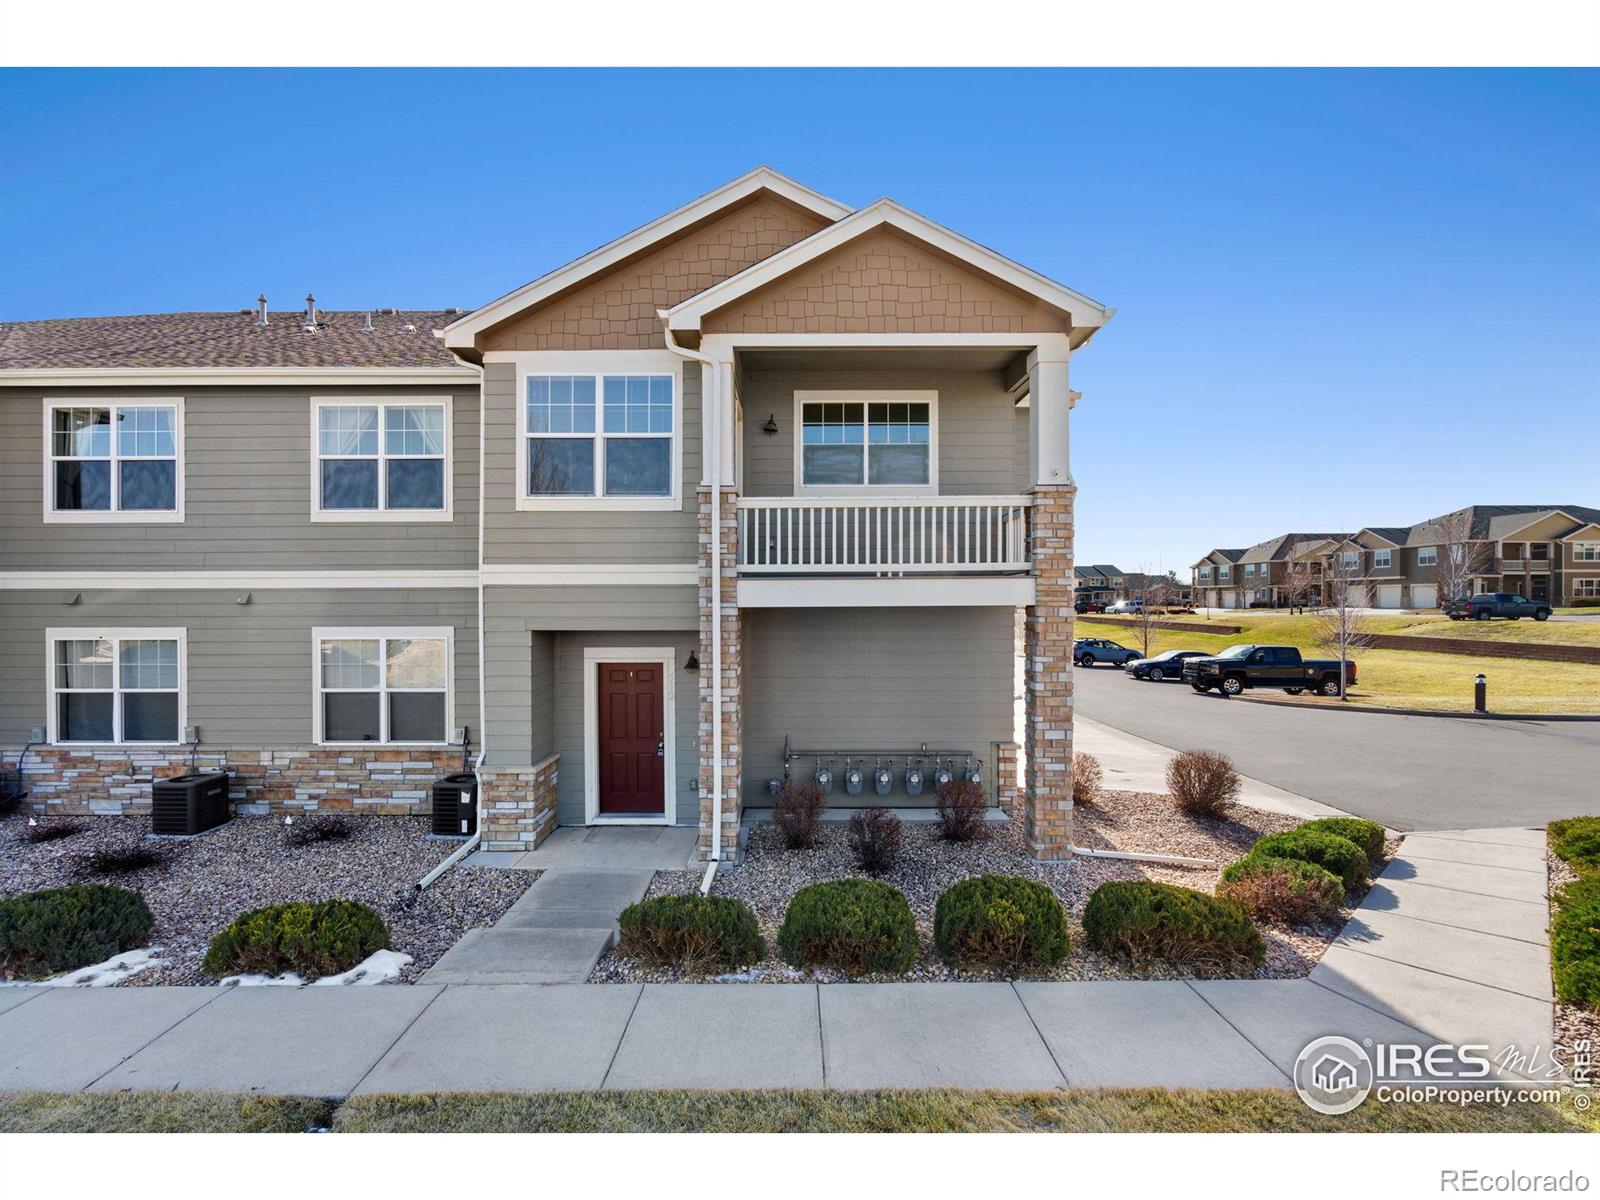 Report Image for 6911 W 3rd Street,Greeley, Colorado